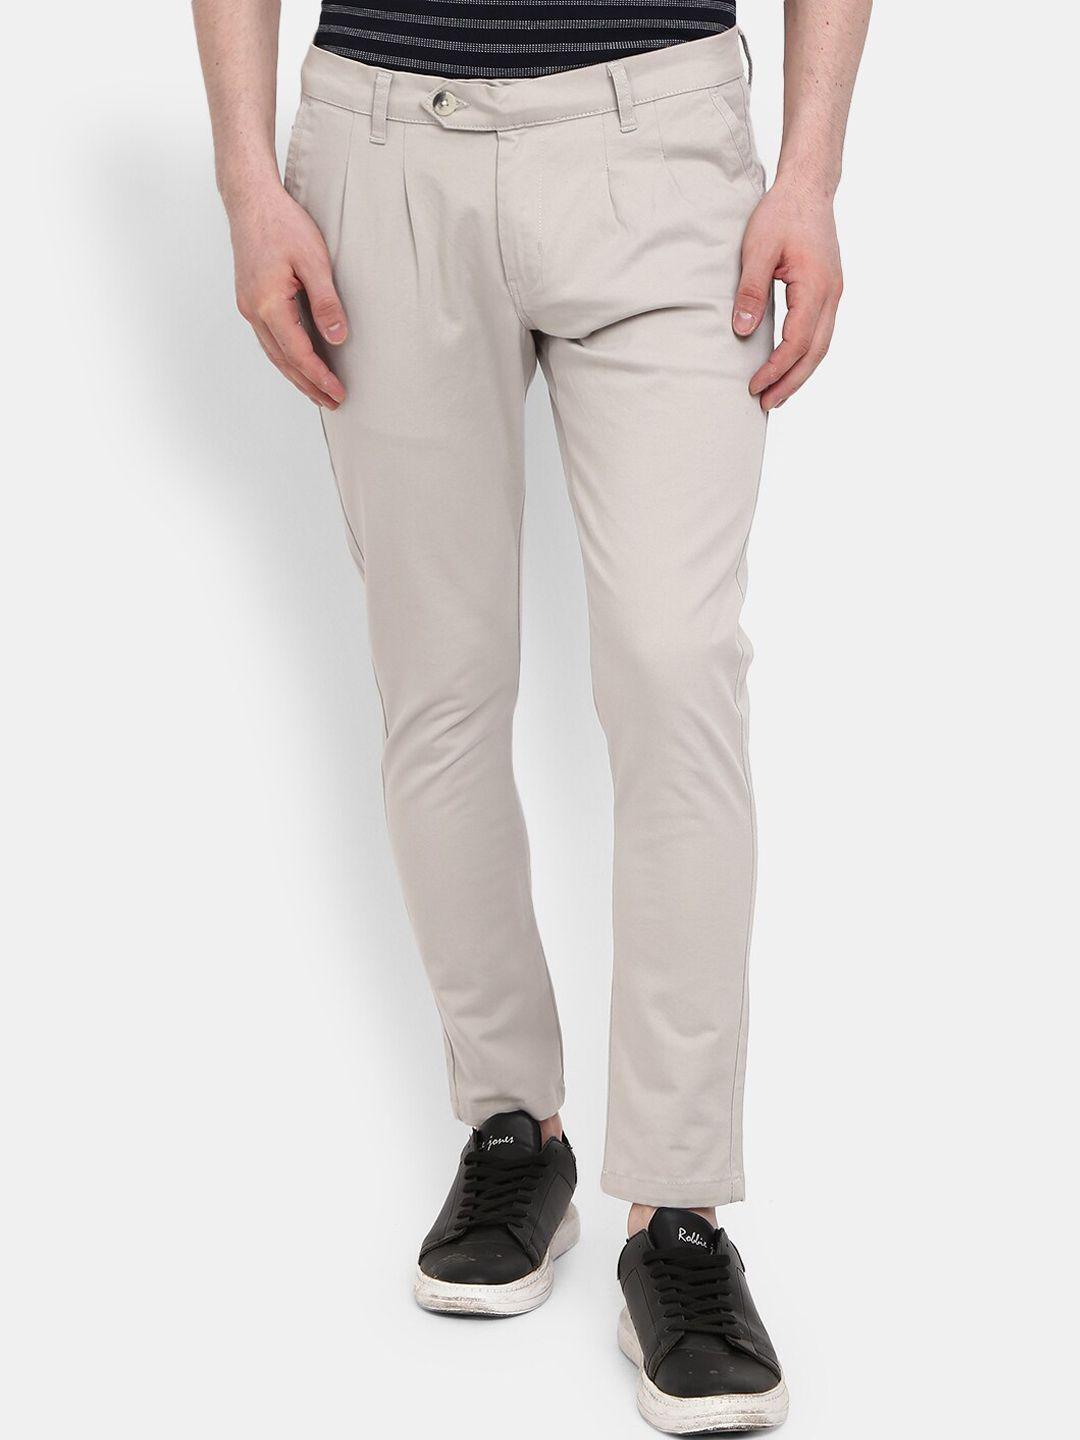 v-mart men grey easy wash pleated chinos trousers